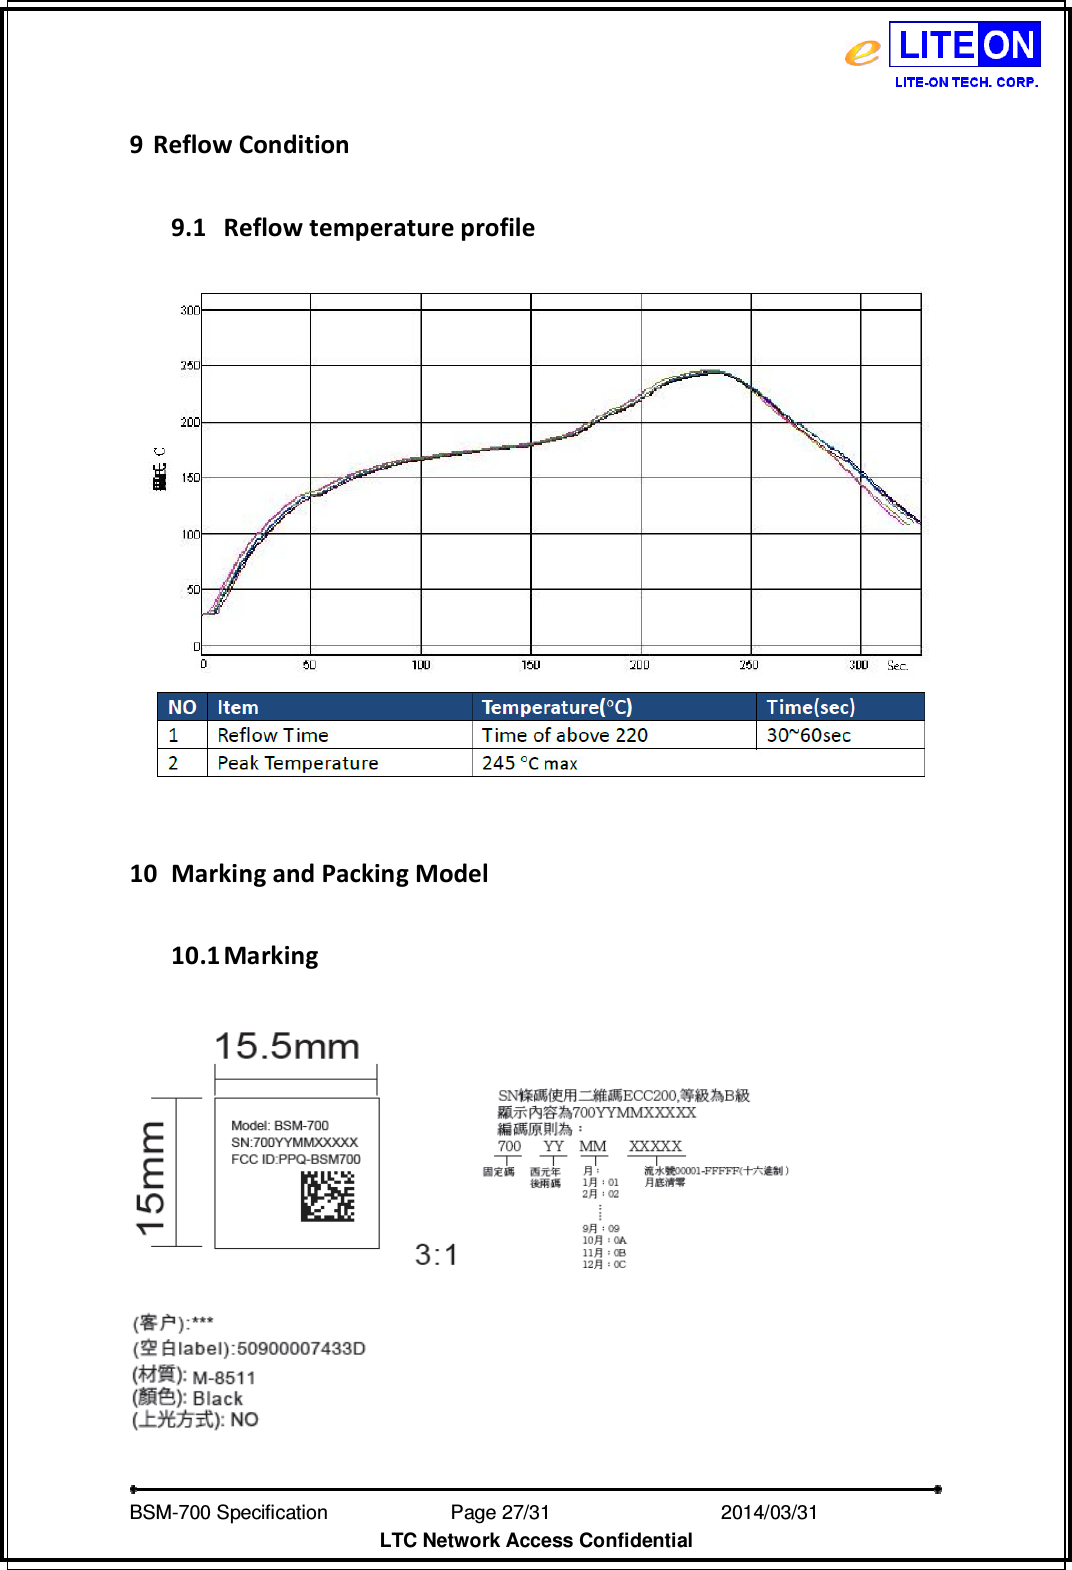   BSM-700 Specification                Page 27/31                           2014/03/31 LTC Network Access Confidential  9 Reflow Condition    9.1 Reflow temperature profile     10 Marking and Packing Model  10.1 Marking      